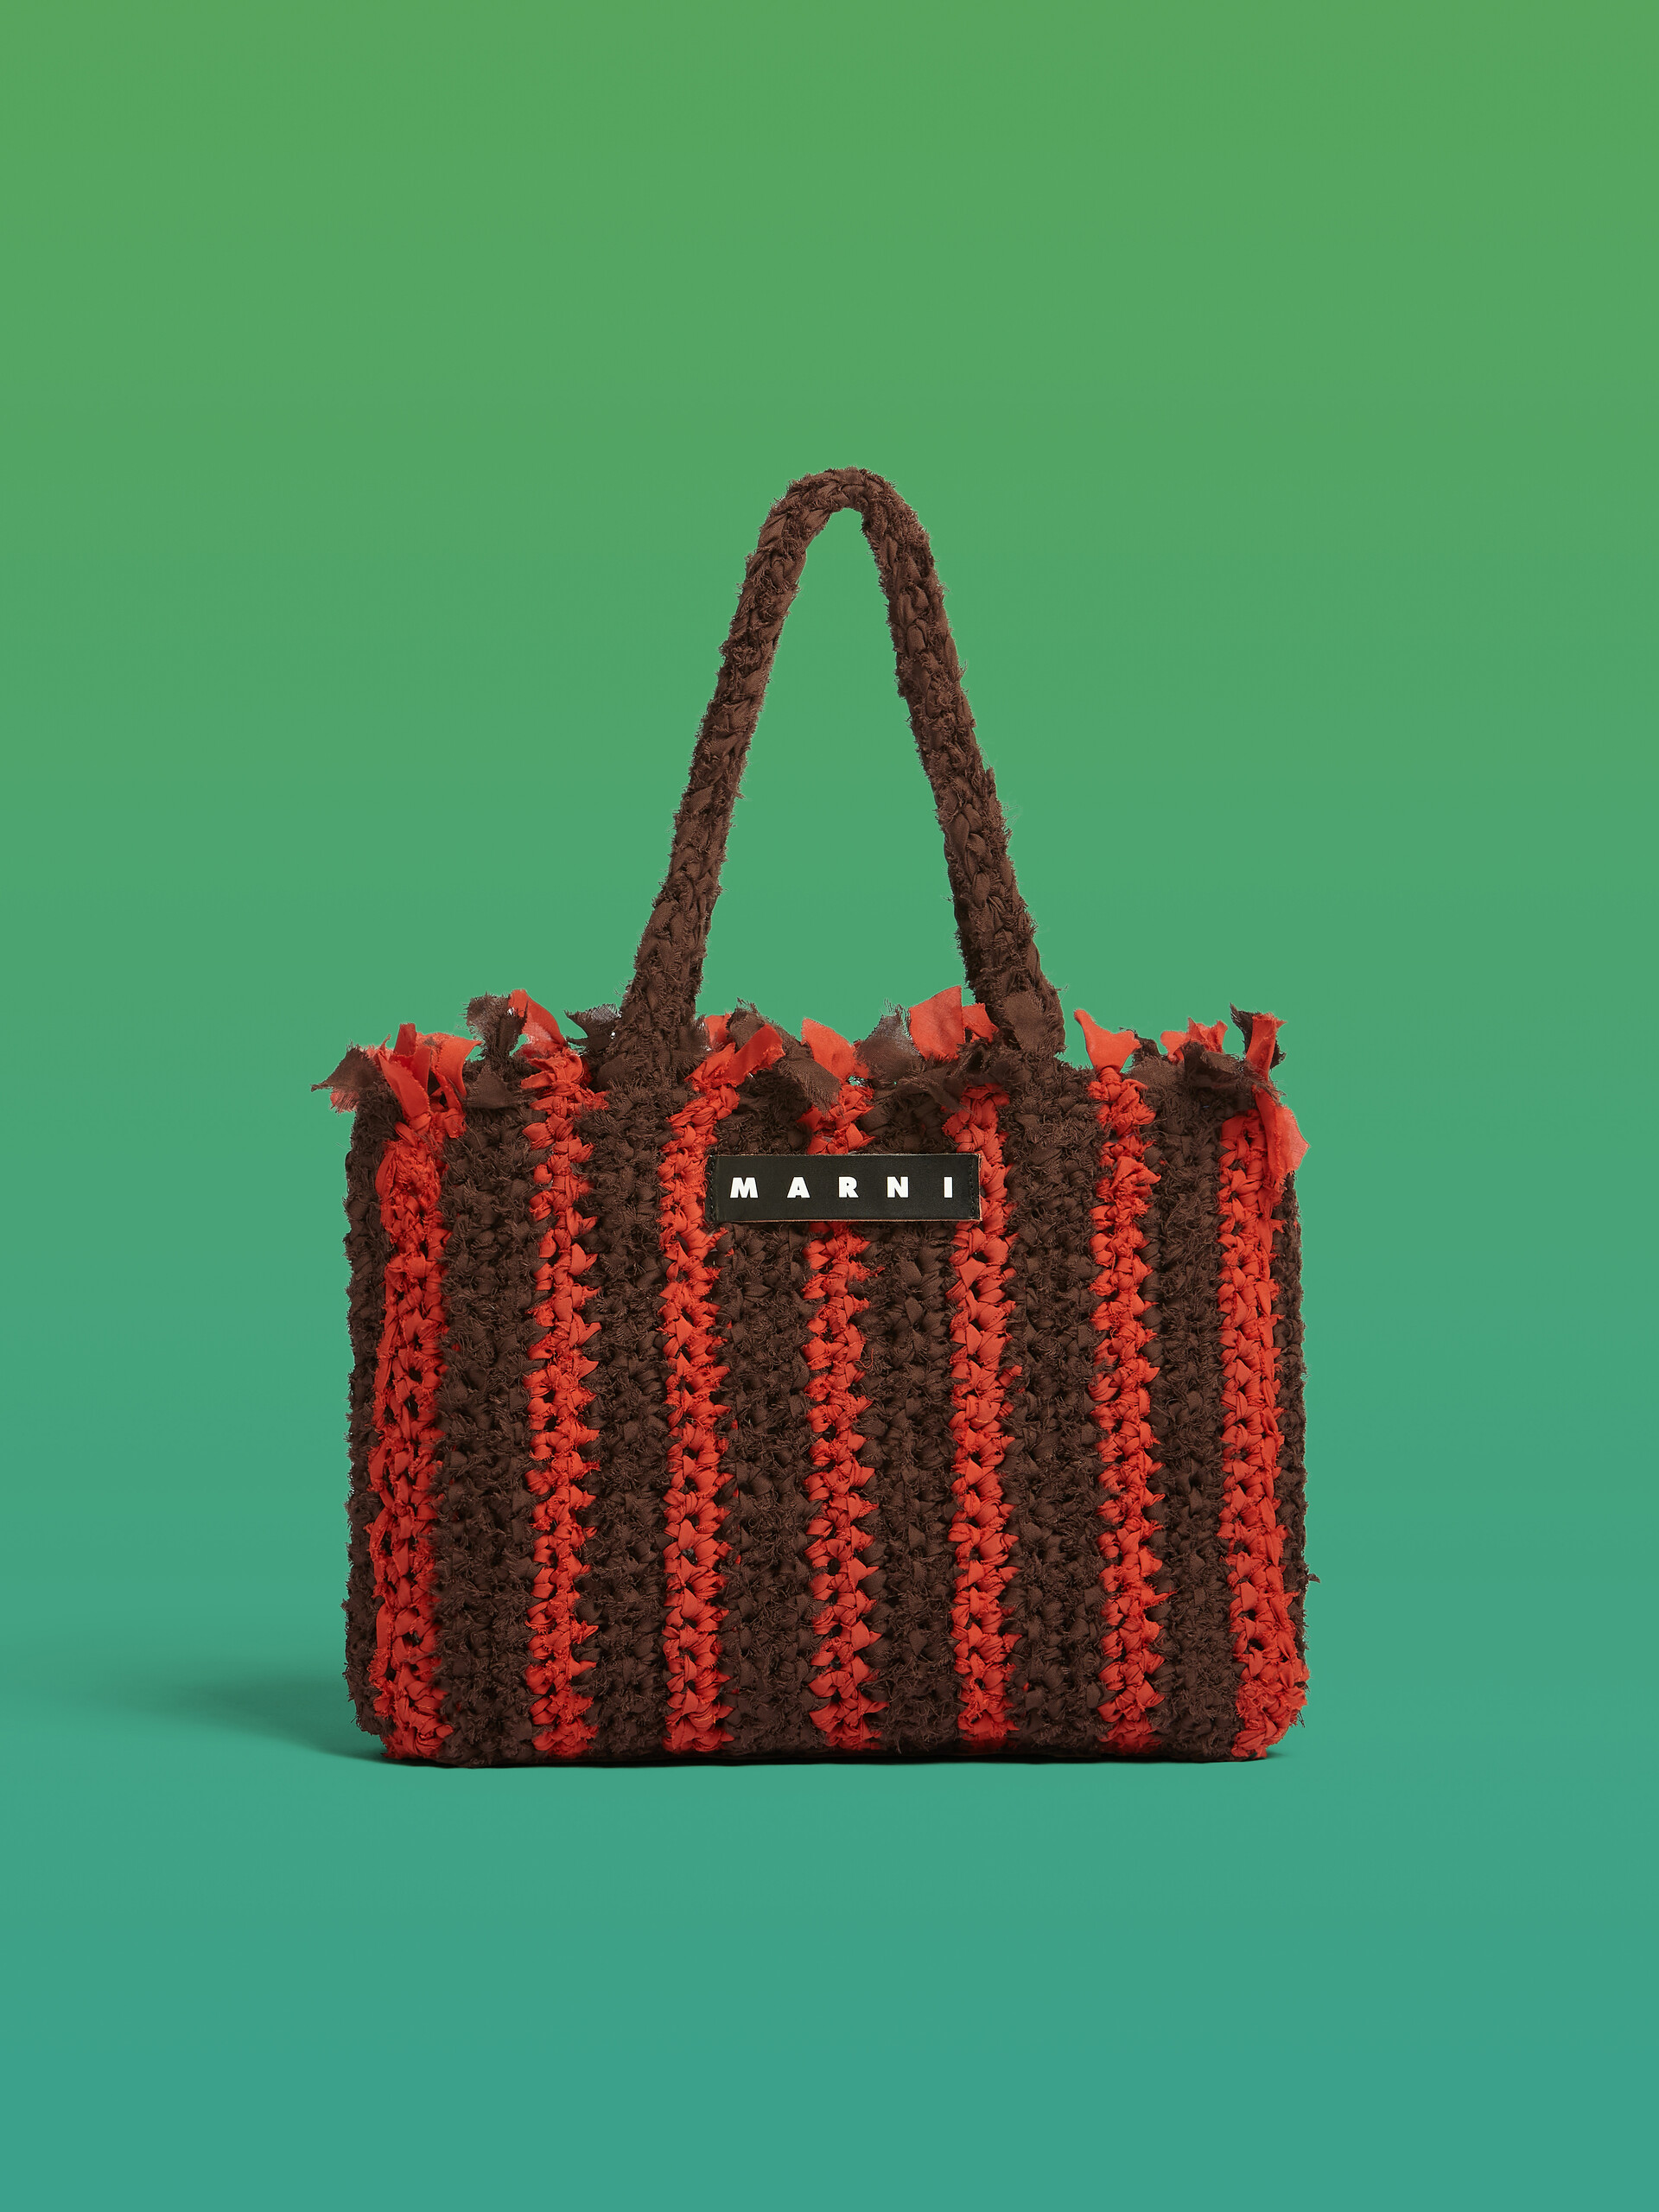 MARNI MARKET bag in brown and red cotton - Bags - Image 1